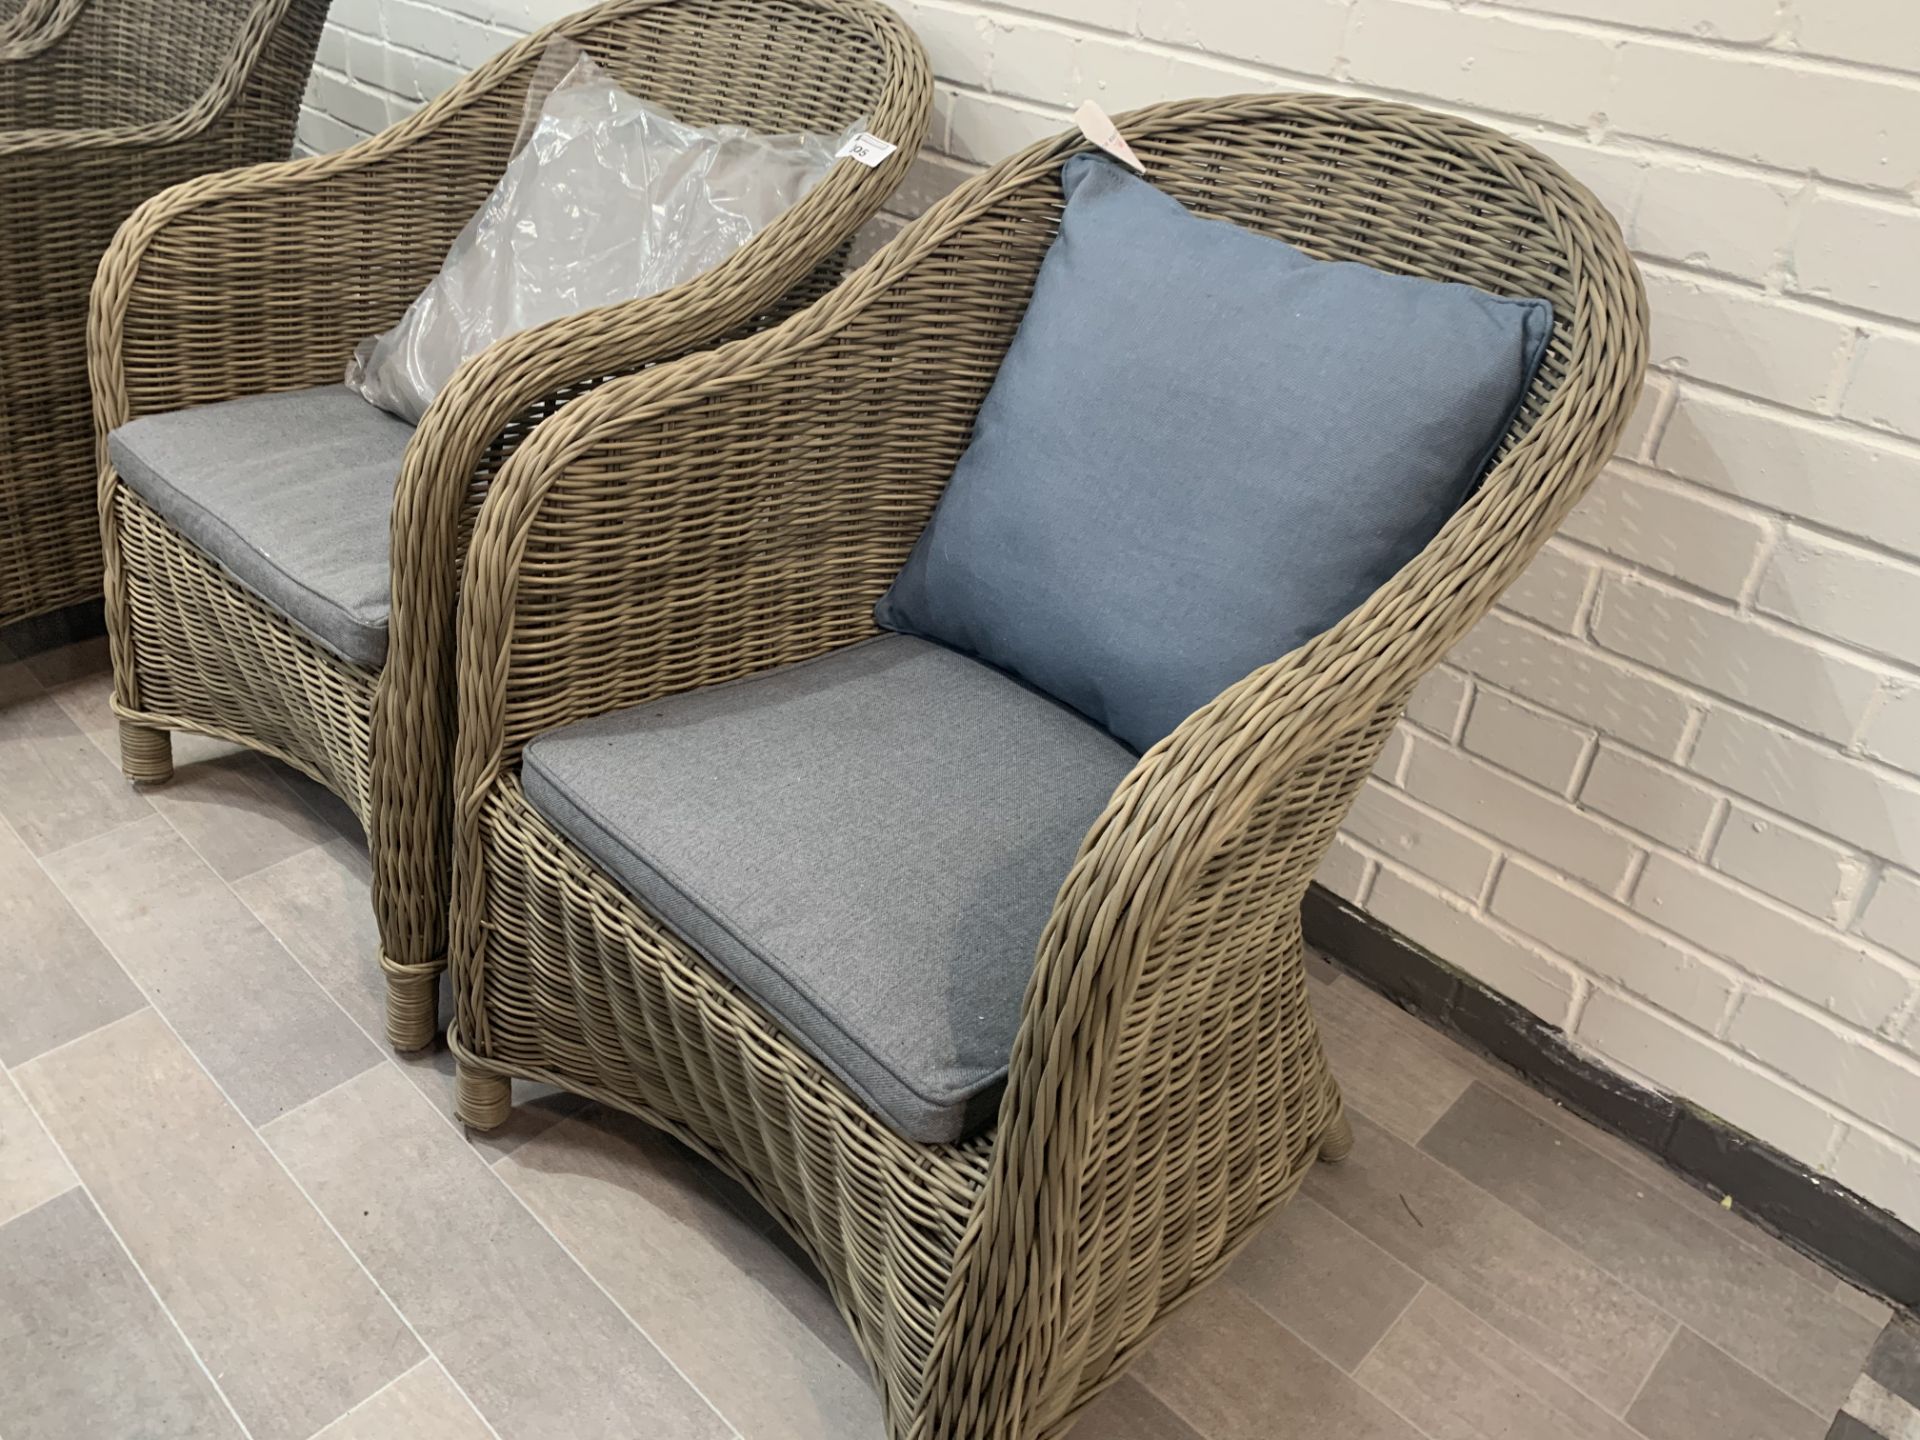 A Pair of Maze Rattan curved back woven arm chairs with cushions - Image 3 of 3